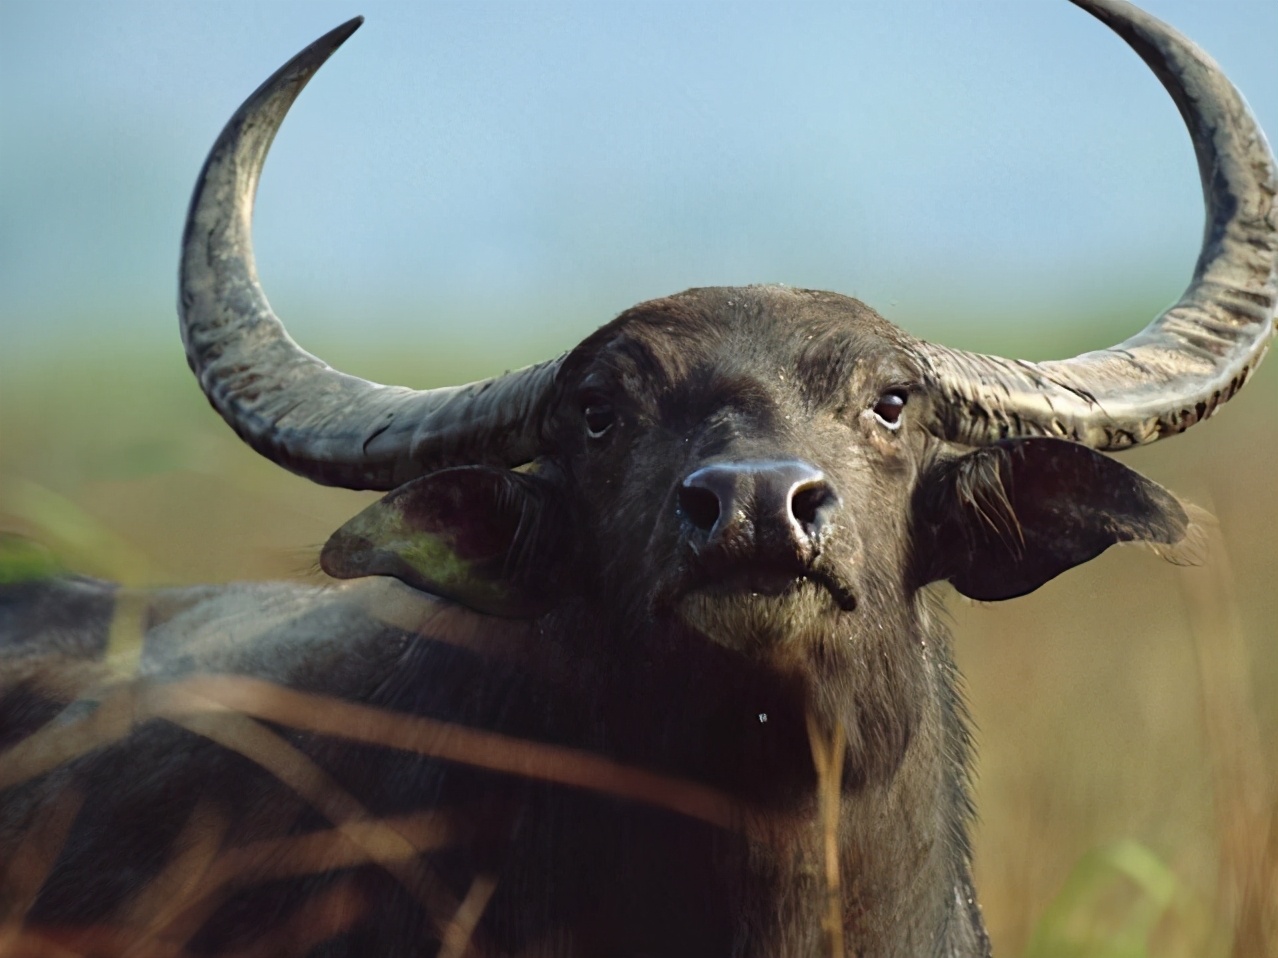 Indian farmers illegally alcohol and were betrayed by their own buffalo - MINNEWS